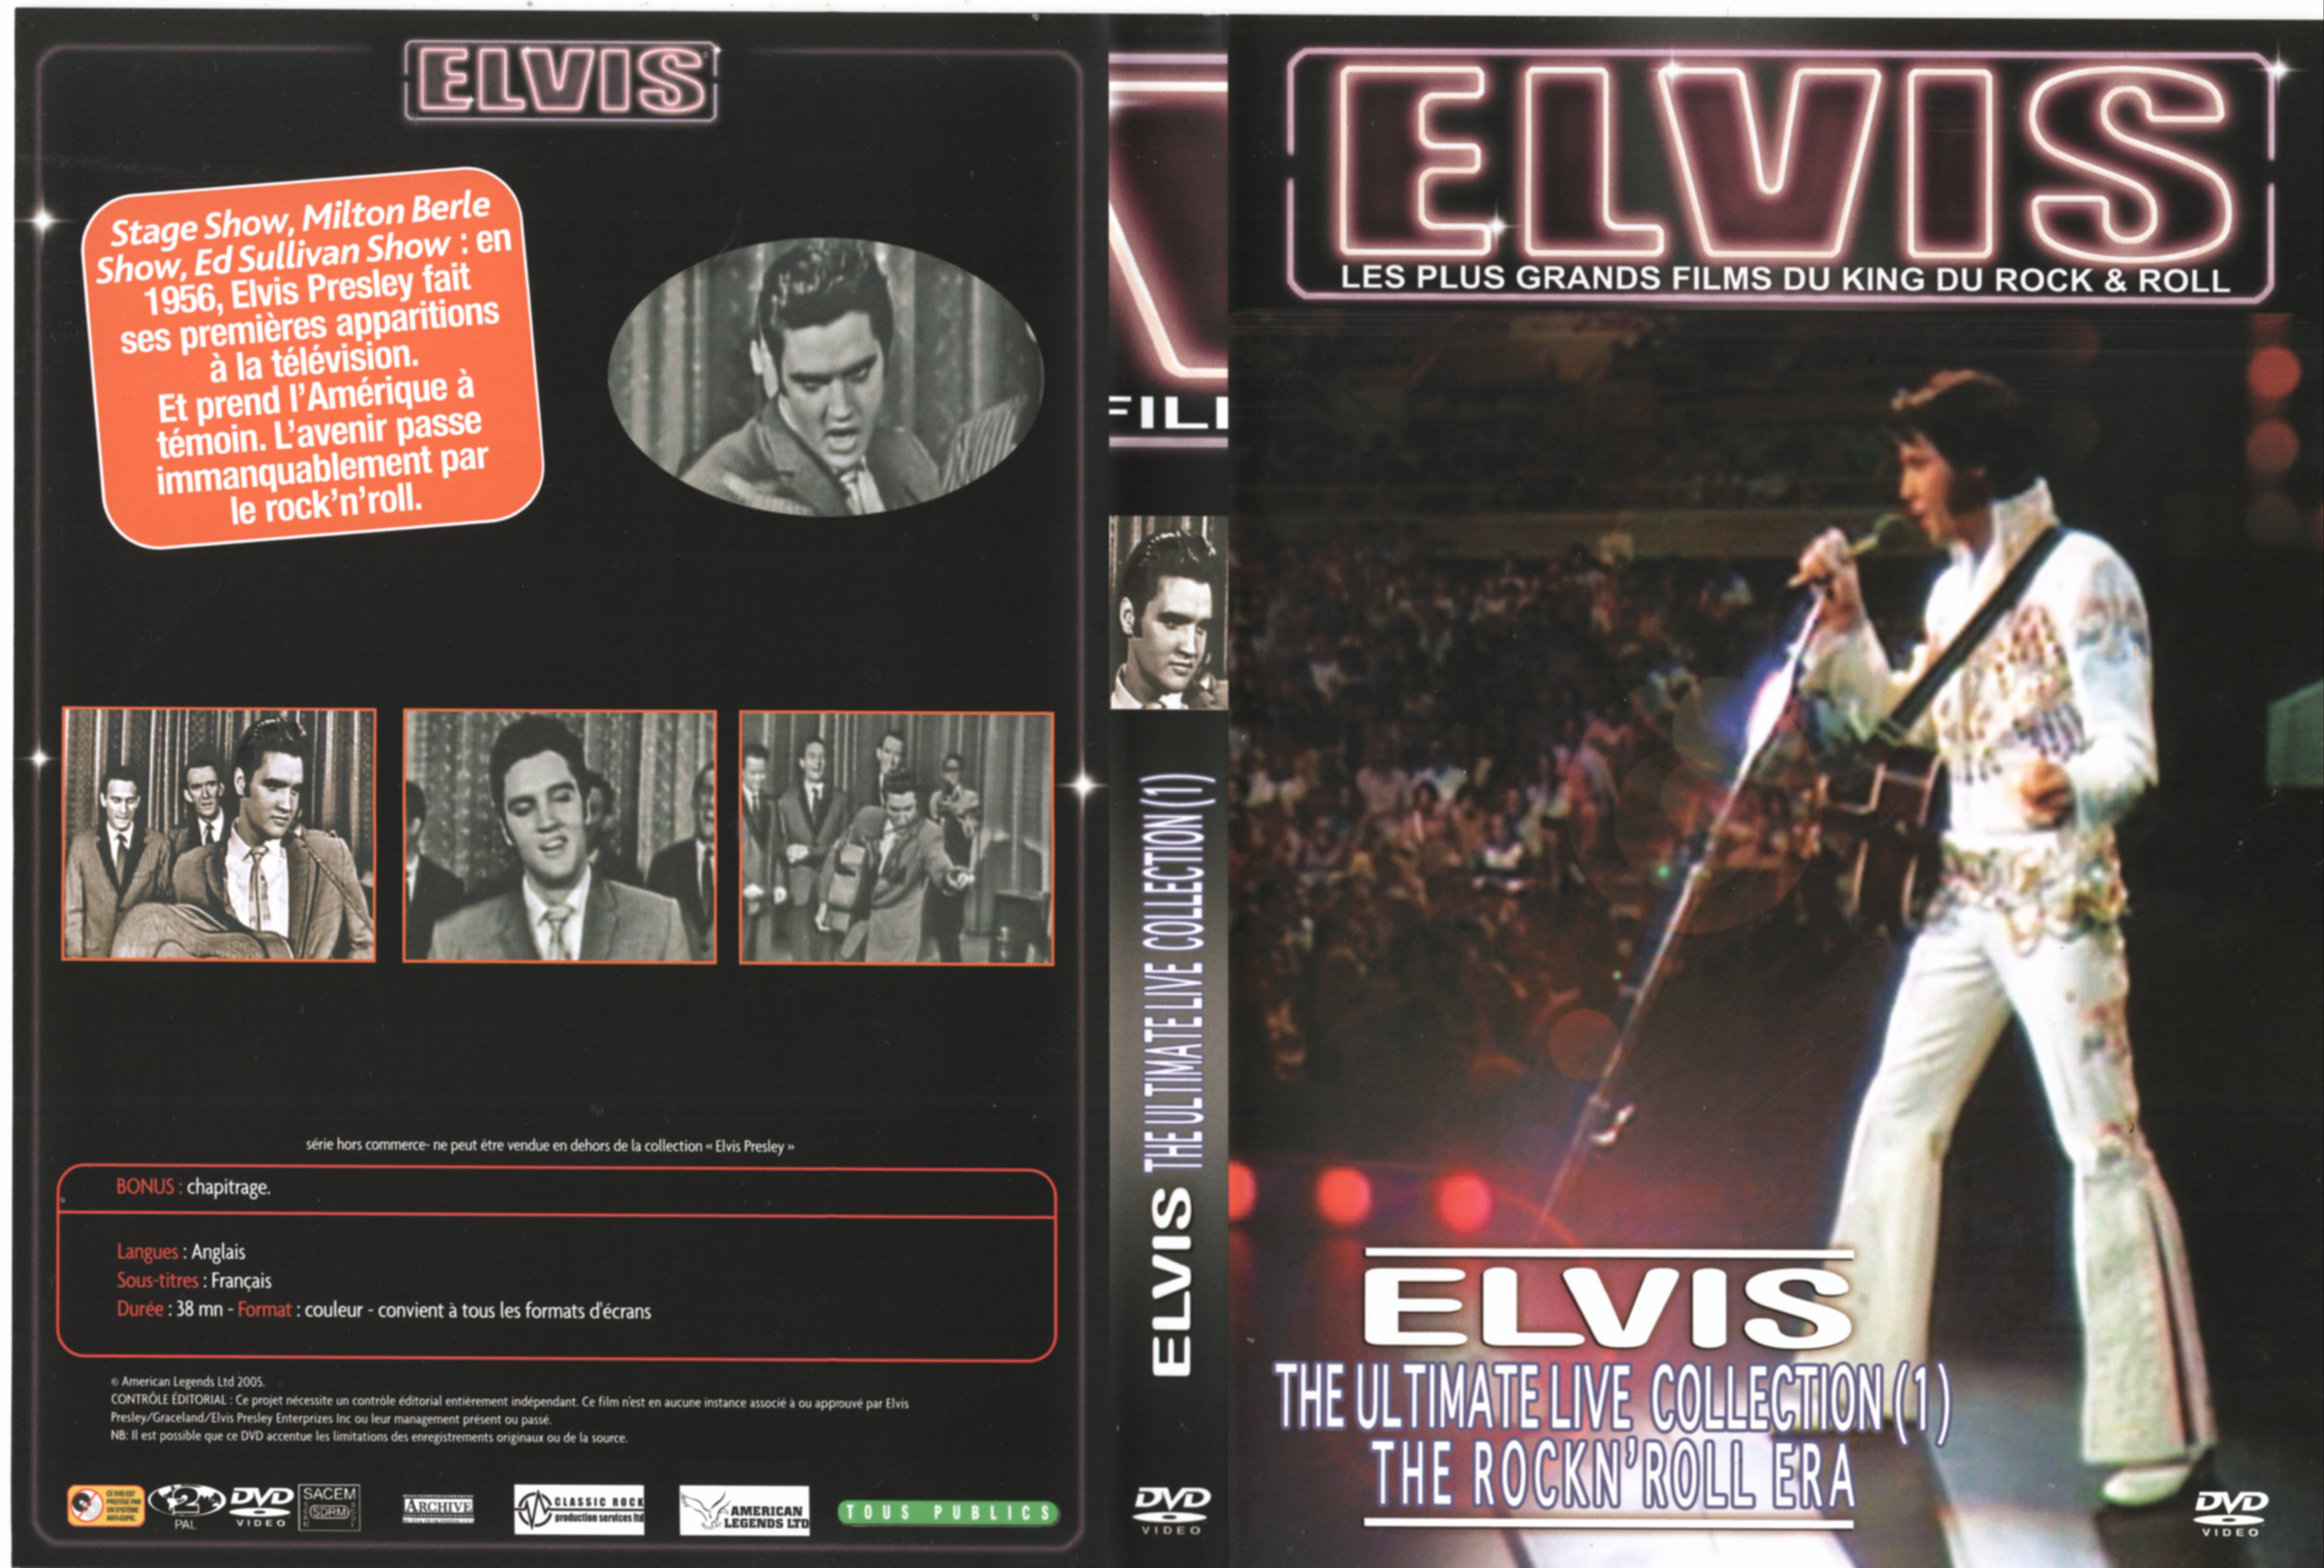 Jaquette DVD Elvis - The ultimate live collection 1